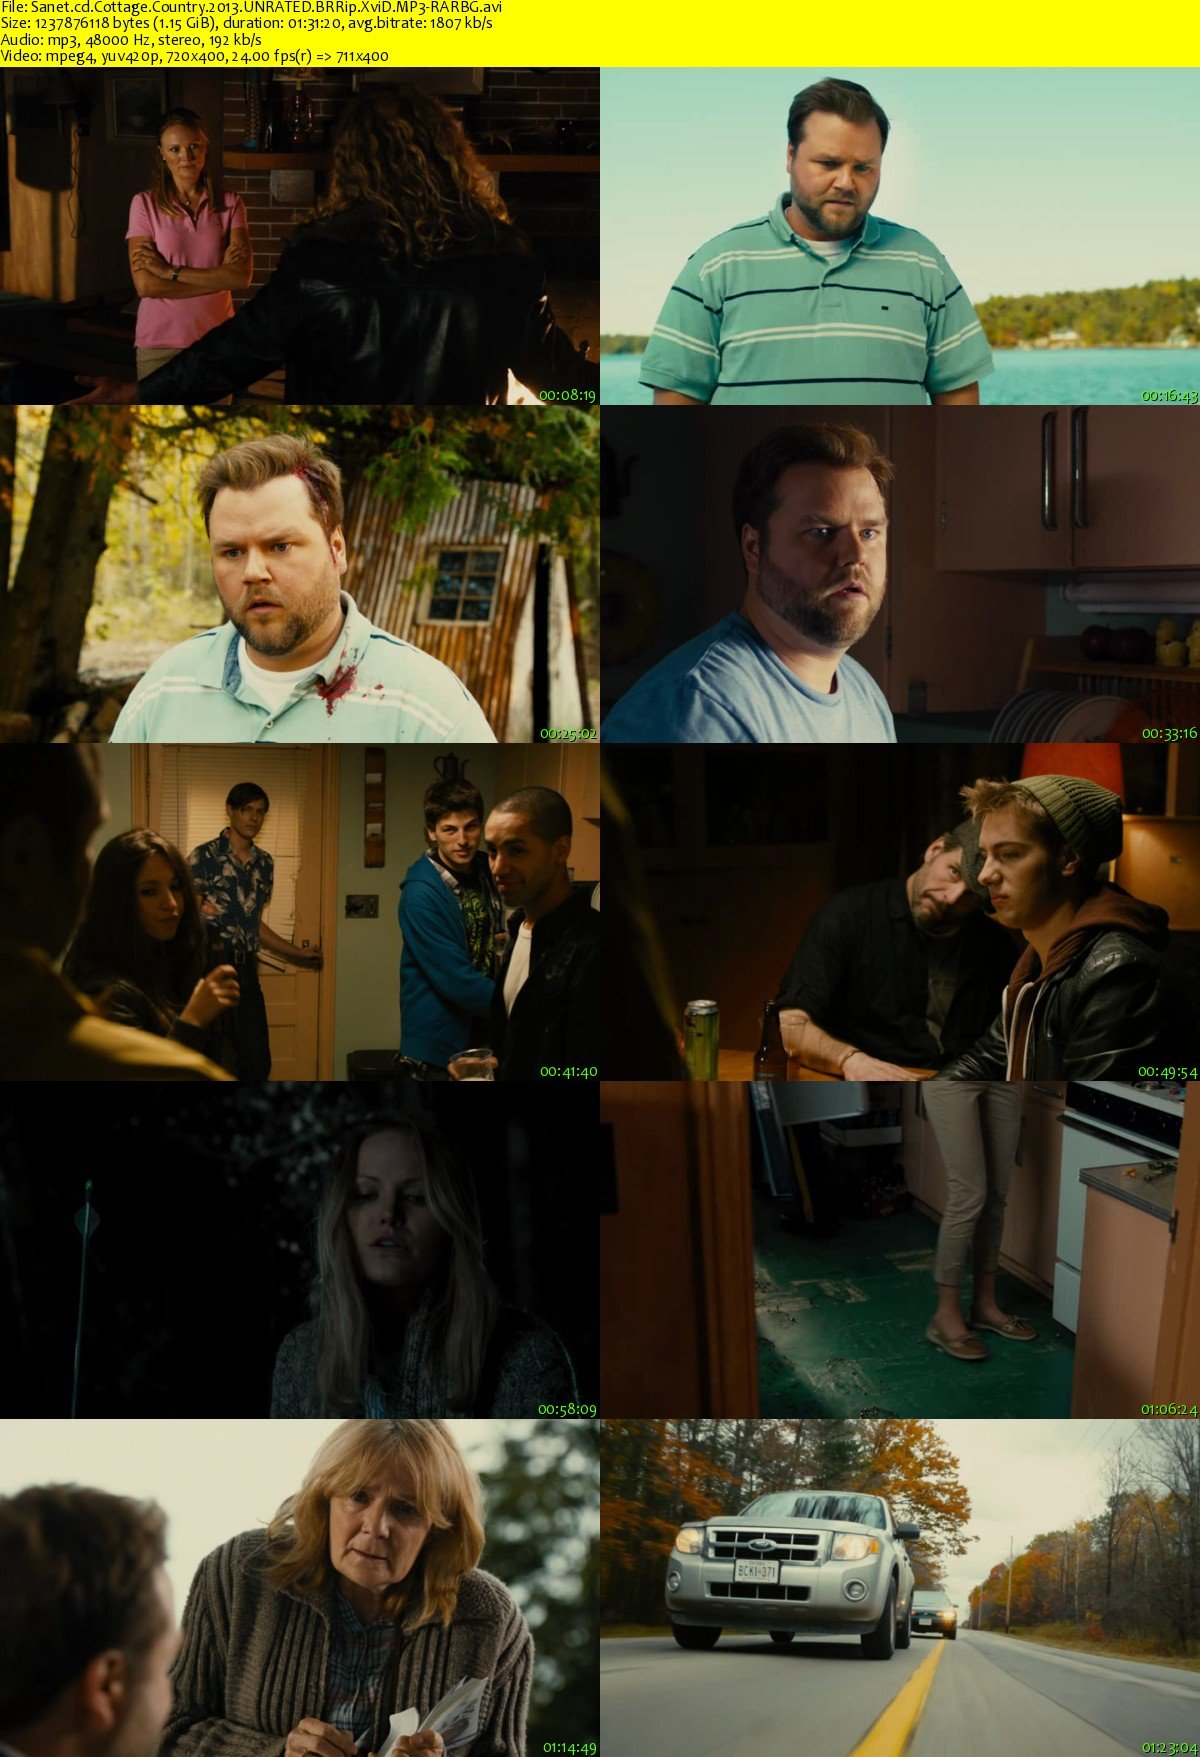 Download Cottage Country 2013 Unrated Brrip Xvid Mp3 Rarbg